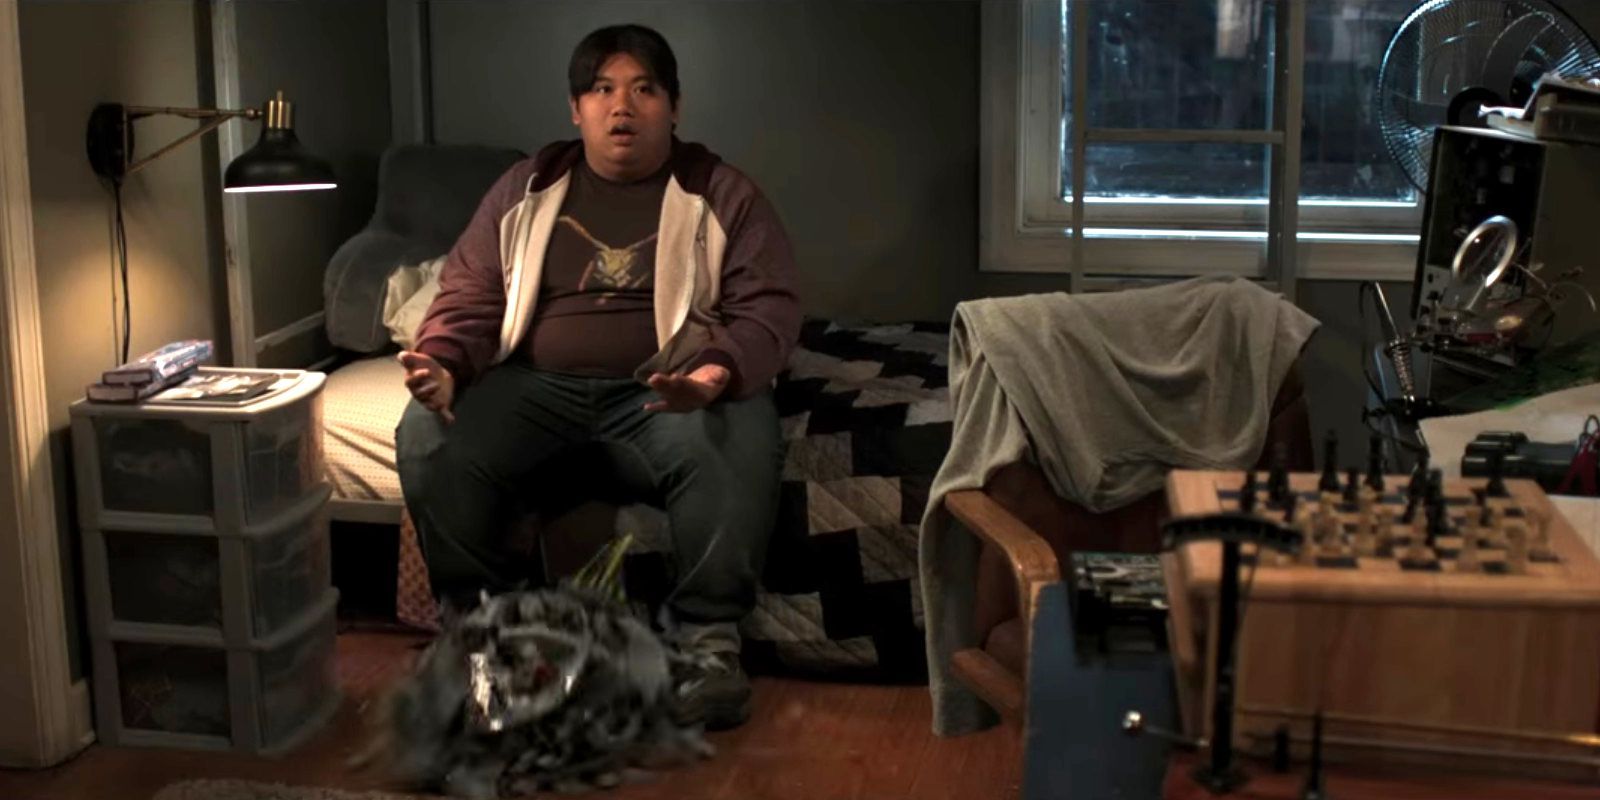 Jacob Batalon as Ned in Spider-Man: Homecoming